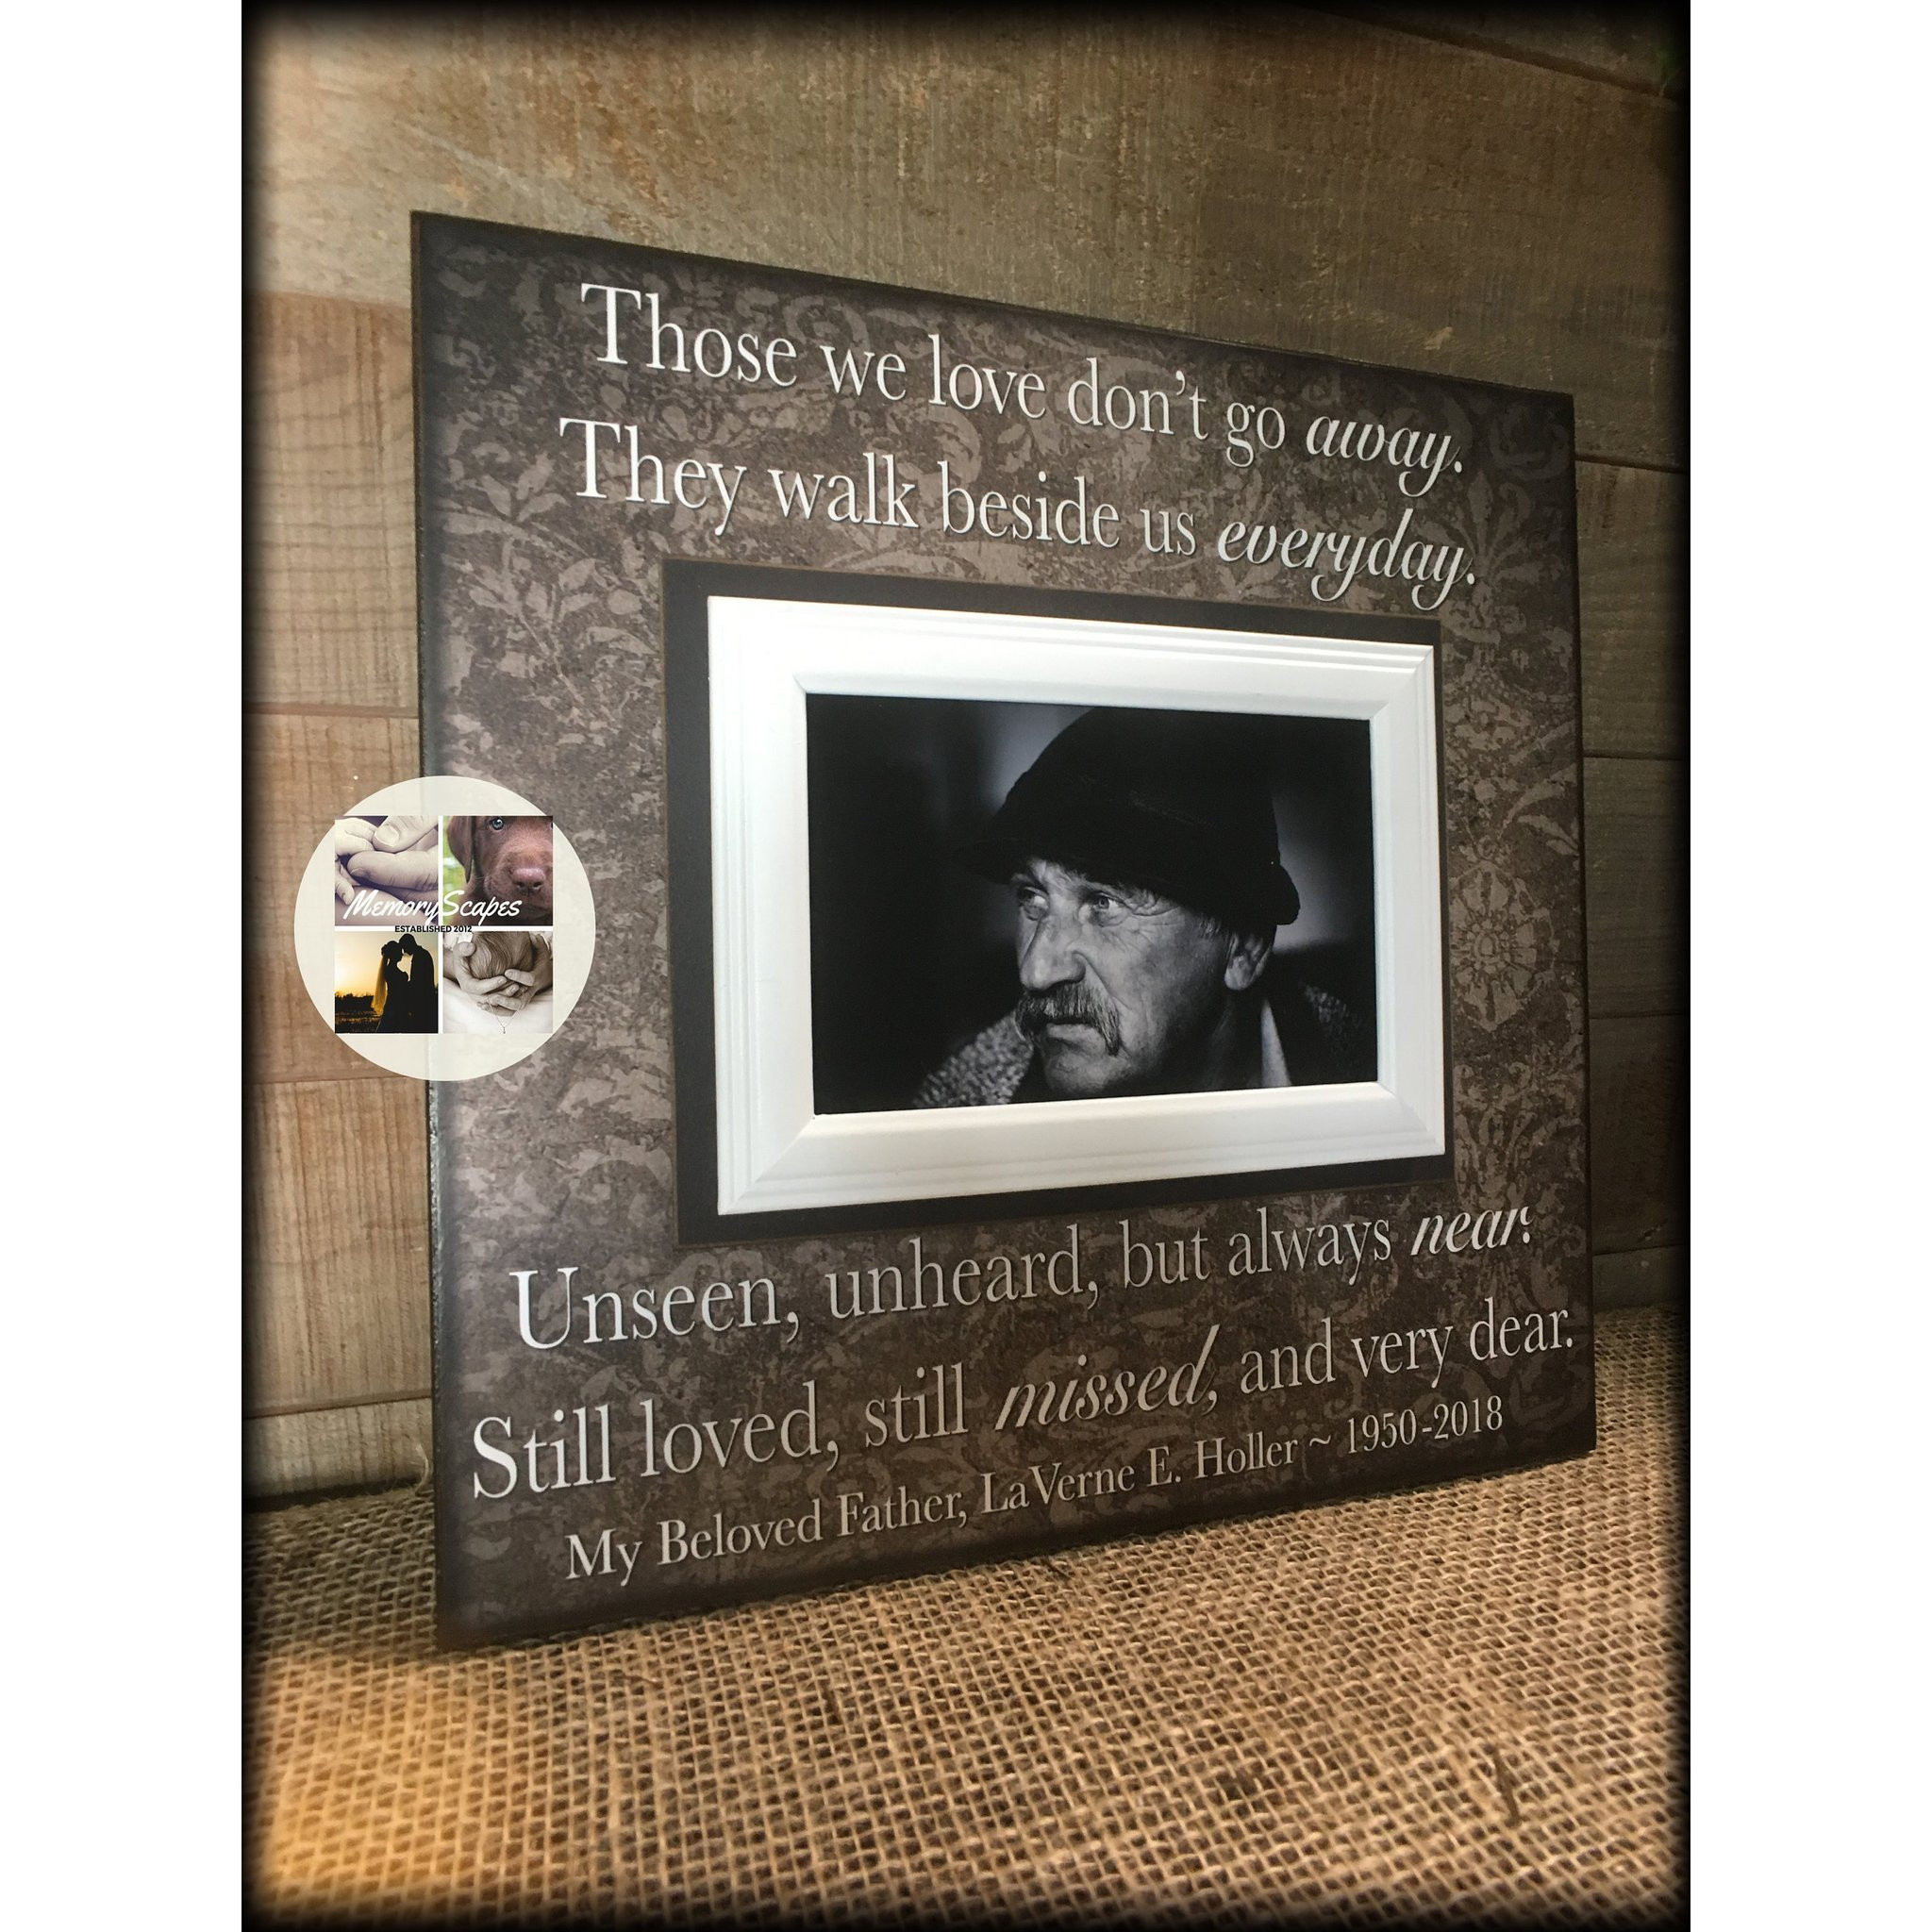 Memorial Gift Ideas For Loss Of Father
 Sympathy Gift Ideas for Loss of Father Picture Frame